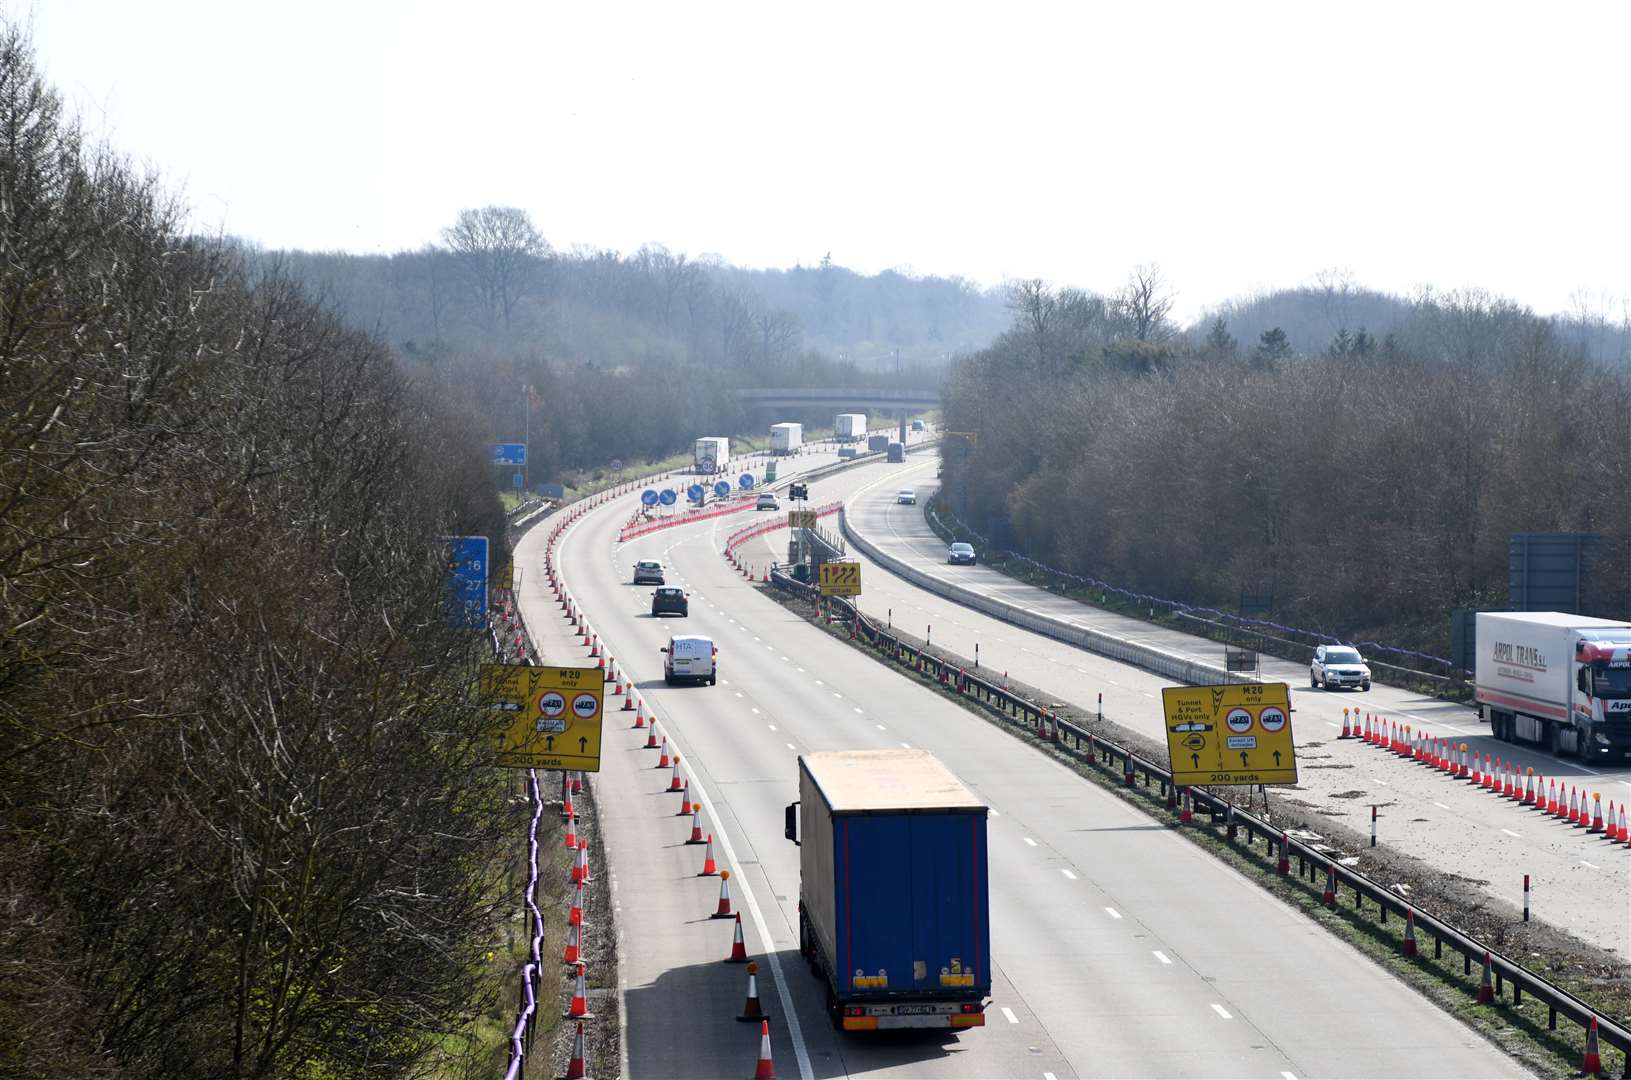 Operation Brock is in place on the M20 motorway. Picture: Barry Goodwin